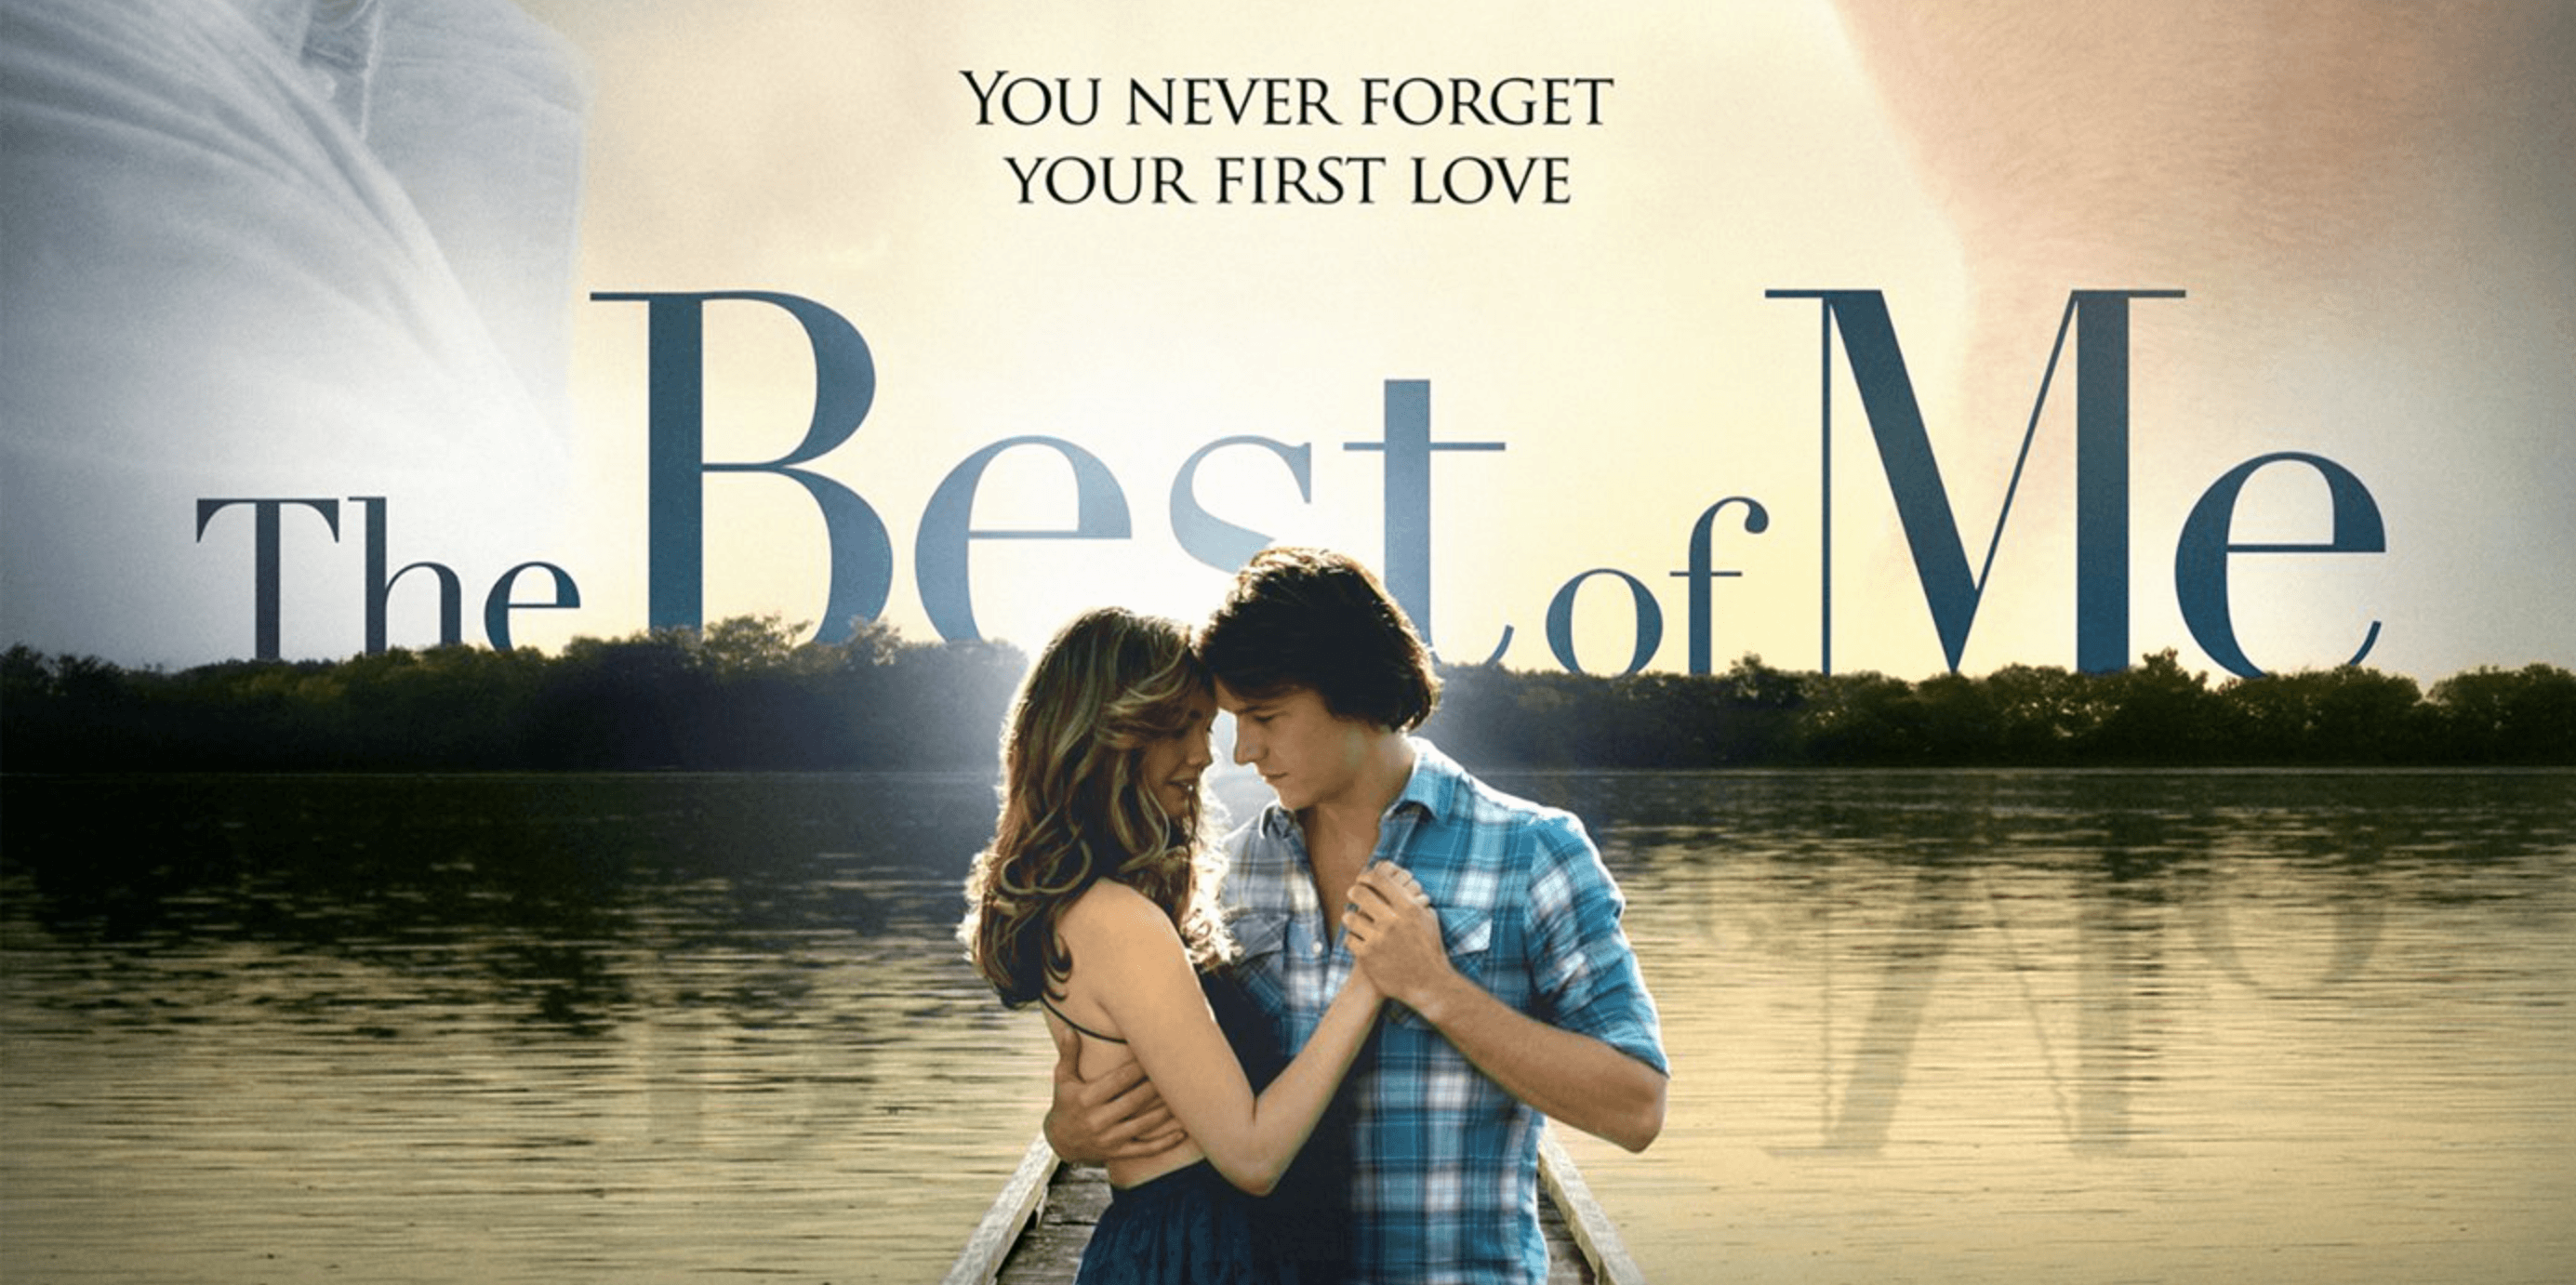 great love movies to watch-the world the best of me